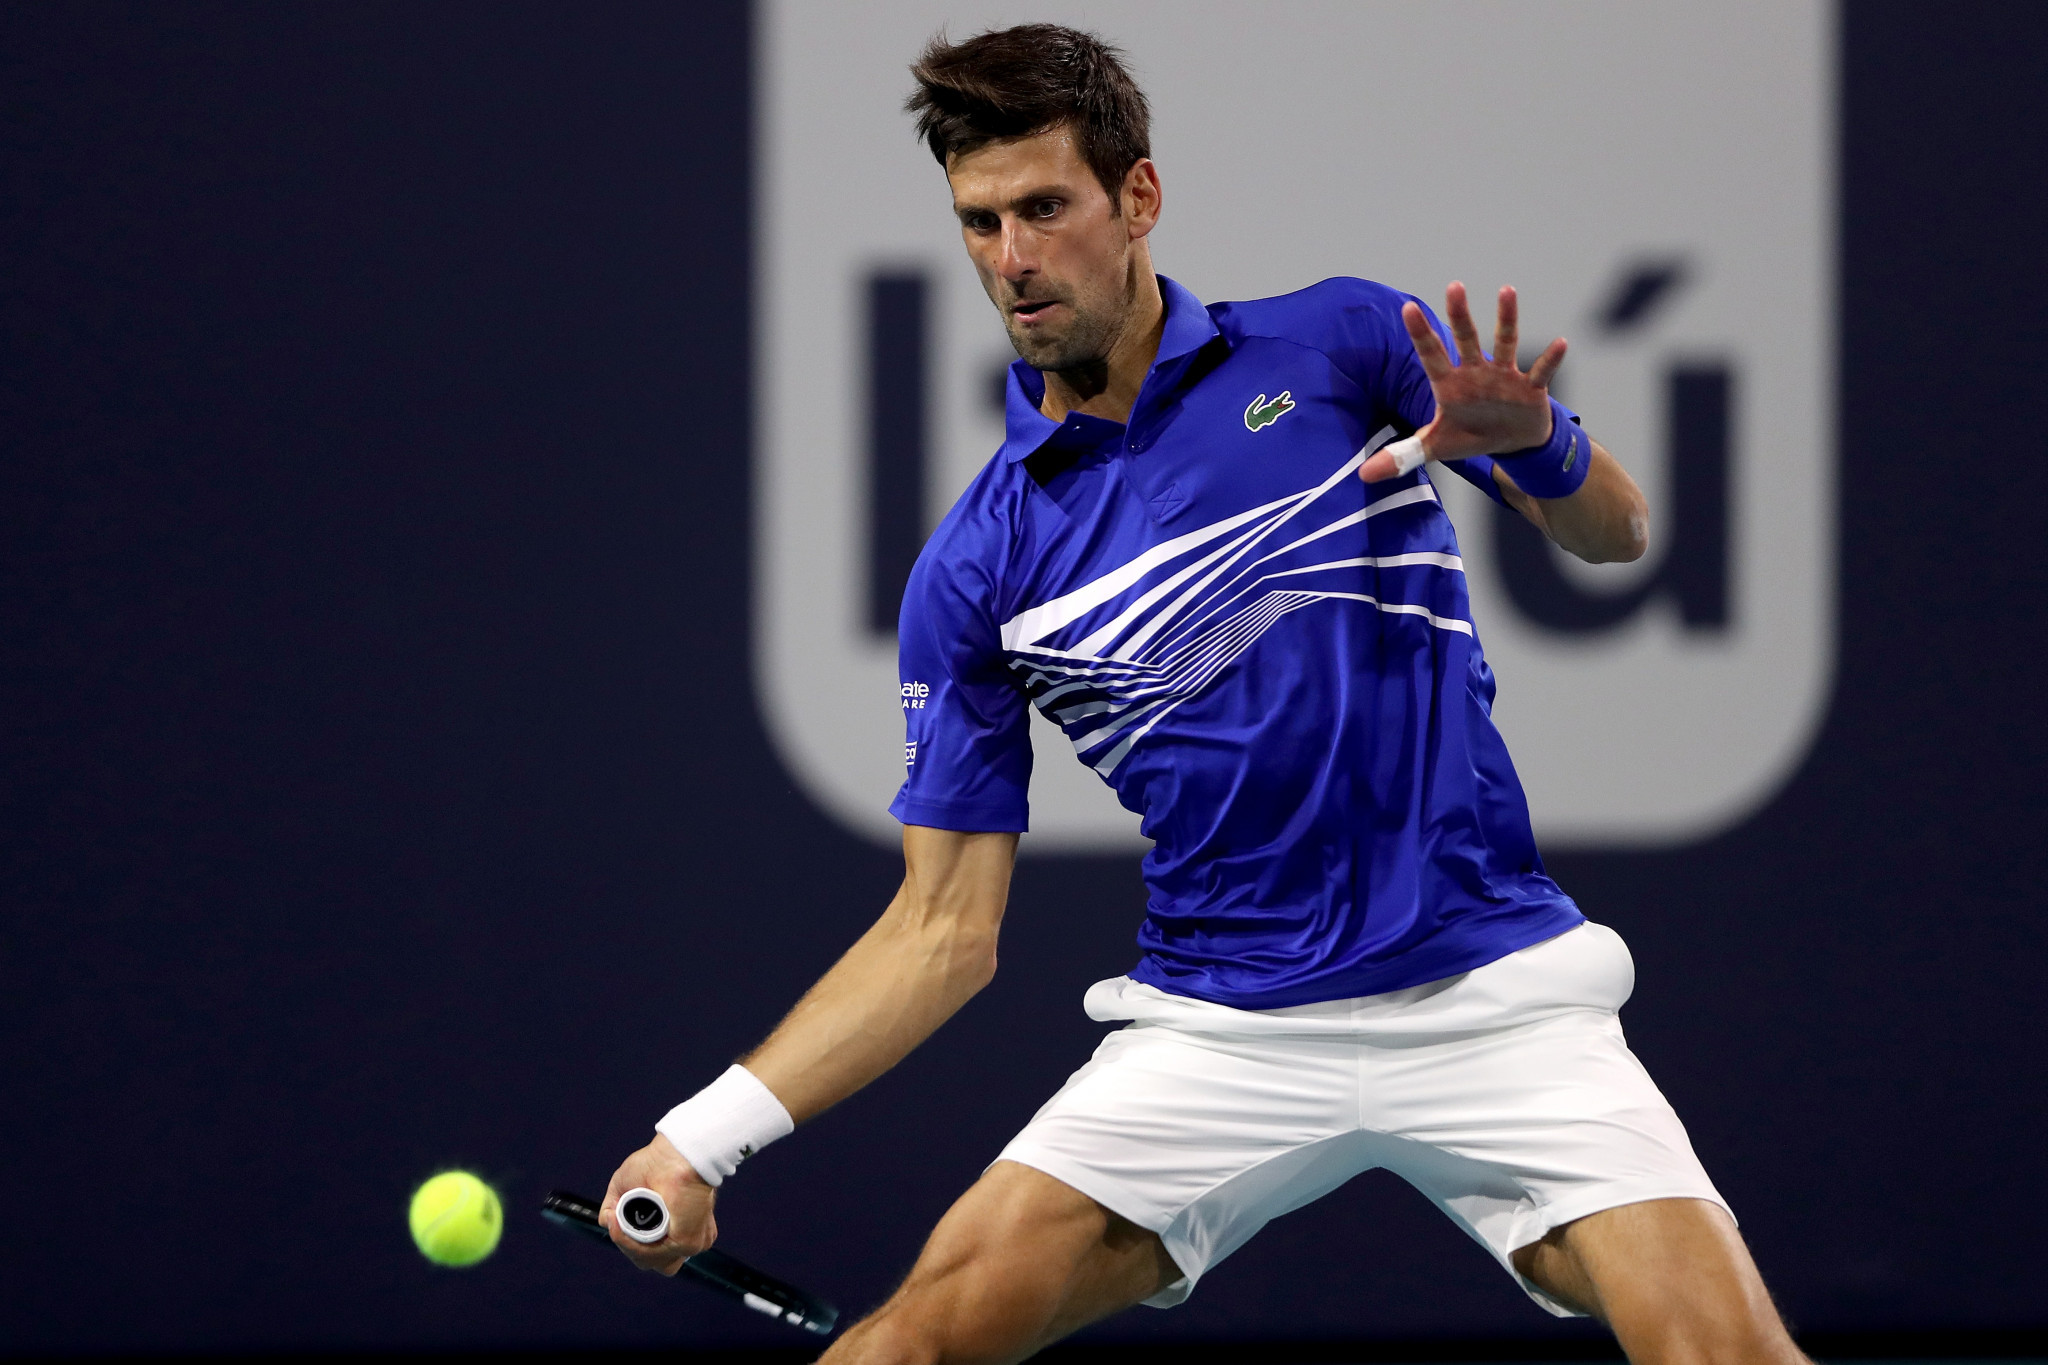 Djokovic begins pursuit of record seventh title at Miami Open with victory over Tomic